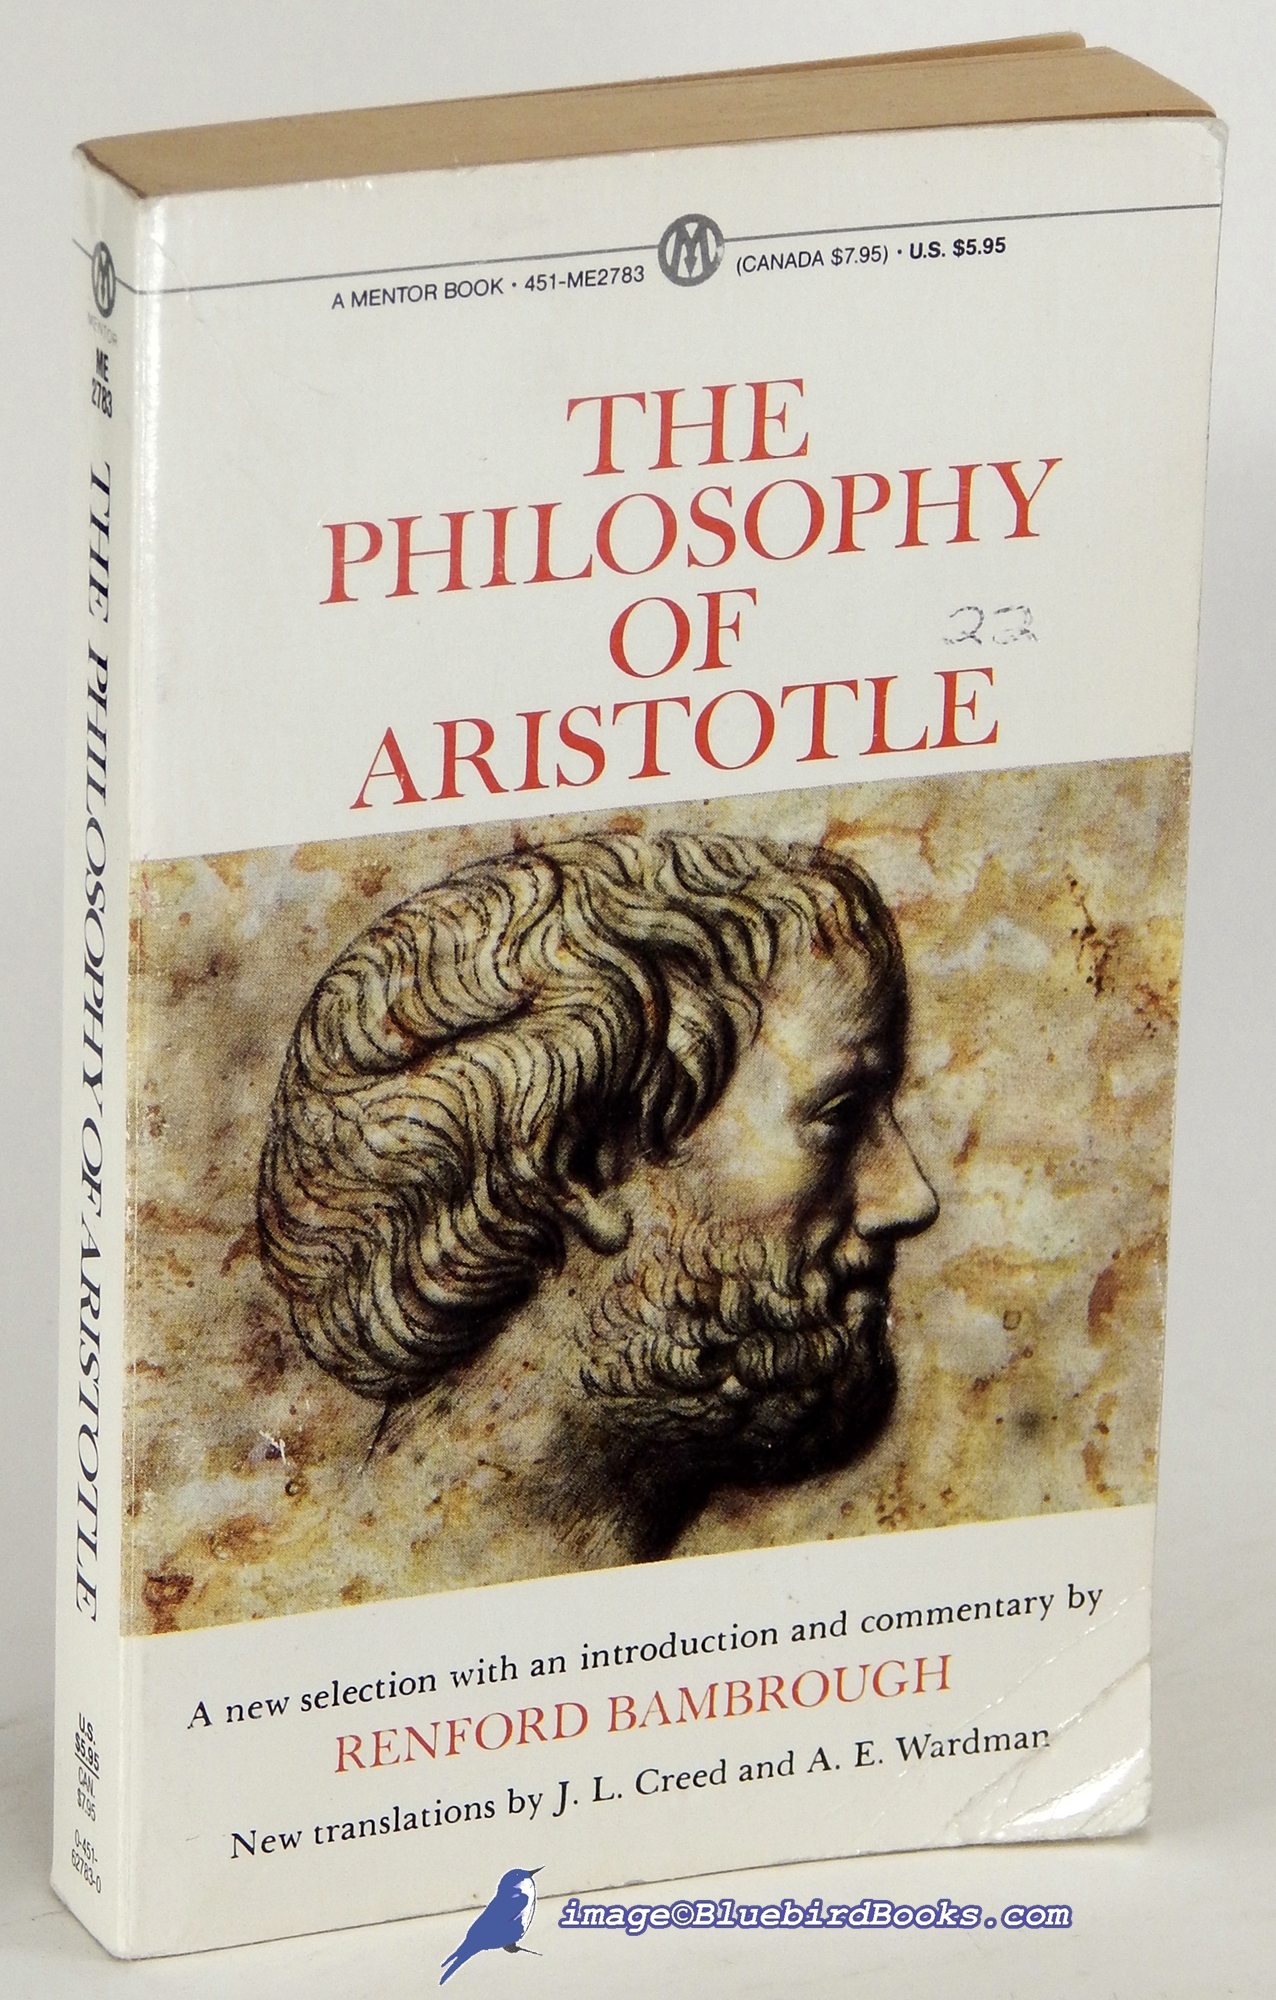 THE LIBRARY OF ARISTOTLE: THE MOST IMPORTANT COLLECTION OF BOOKS EVER  FORMED